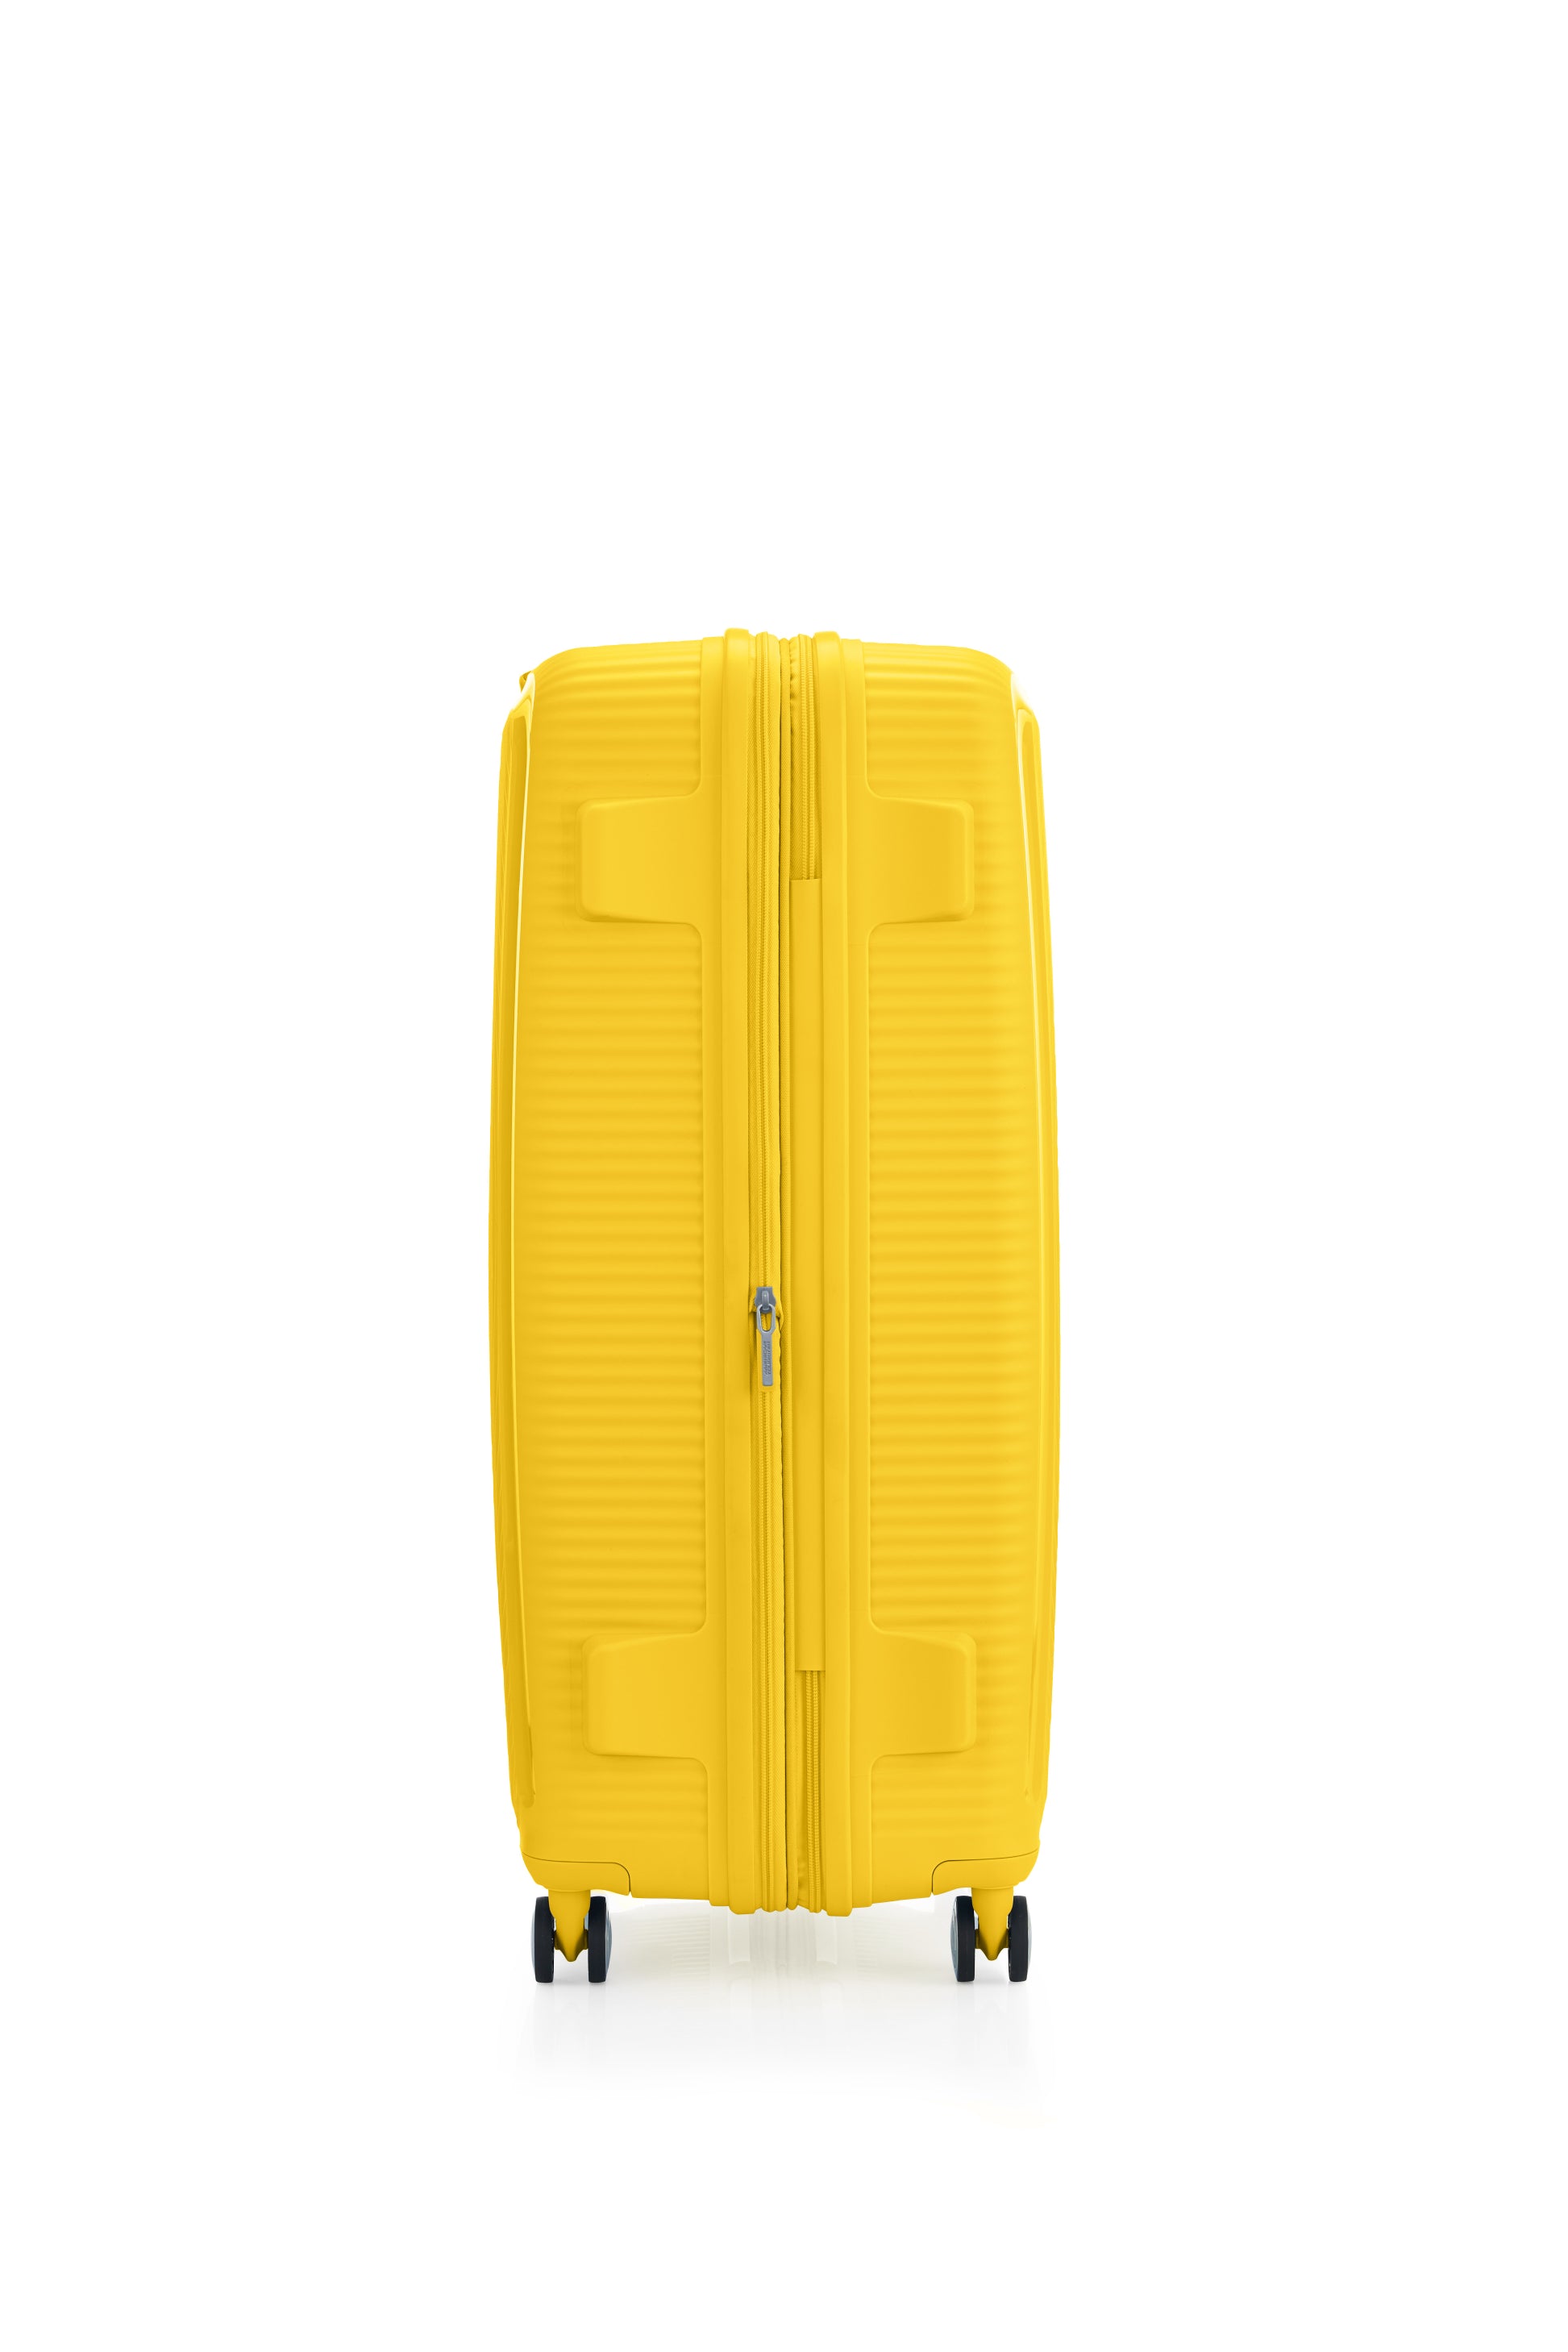 American Tourister - Curio 2.0 80cm Large Suitcase - Golden Yellow - 0